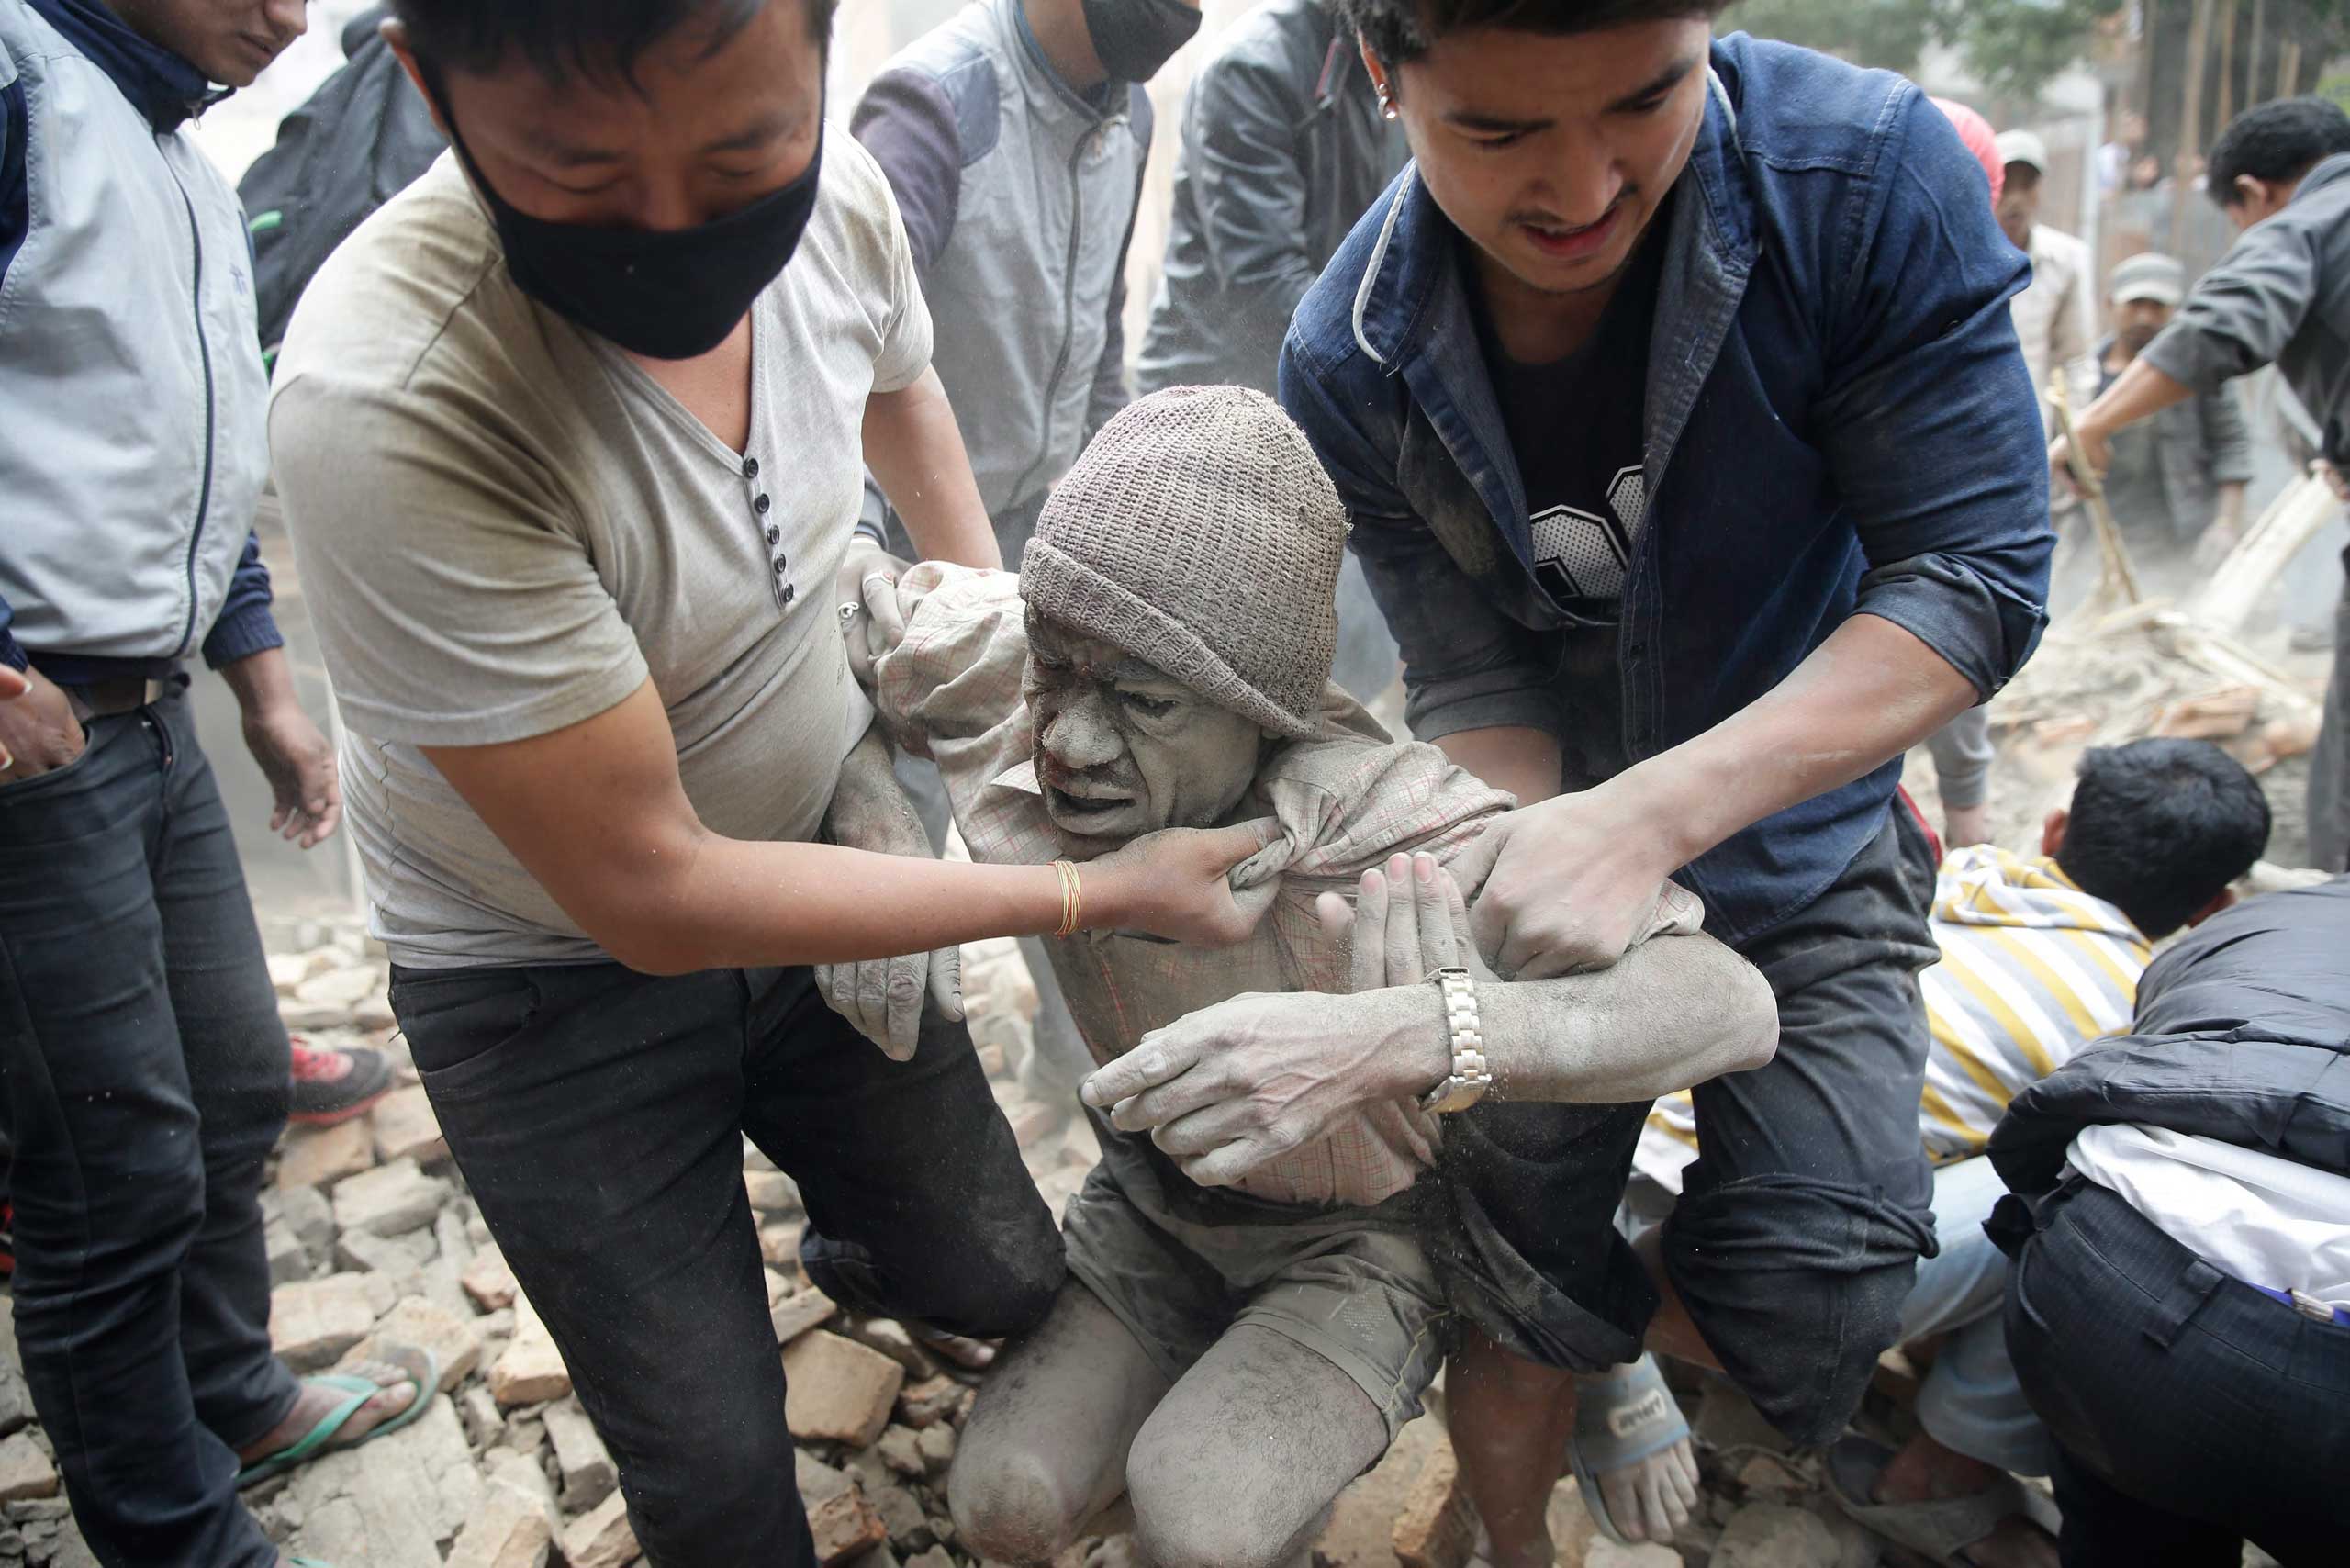 People free a man from the rubble of a destroyed building after an earthquake in Kathmandu, Nepal on April 25, 2015.